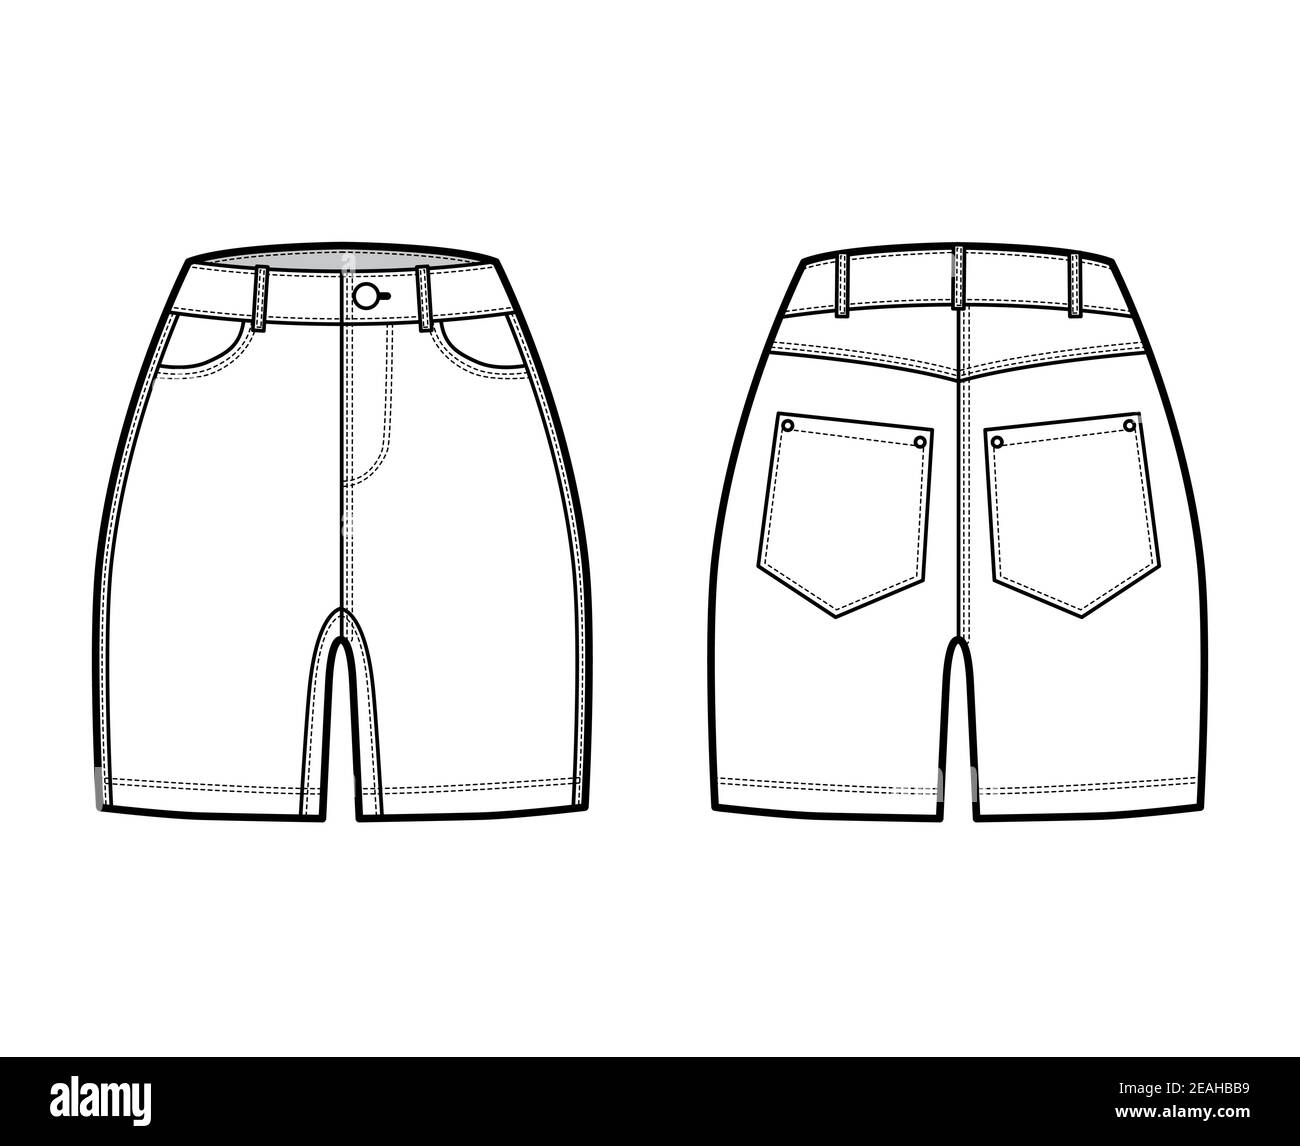 Denim short pants technical fashion illustration with mid-thigh length ...